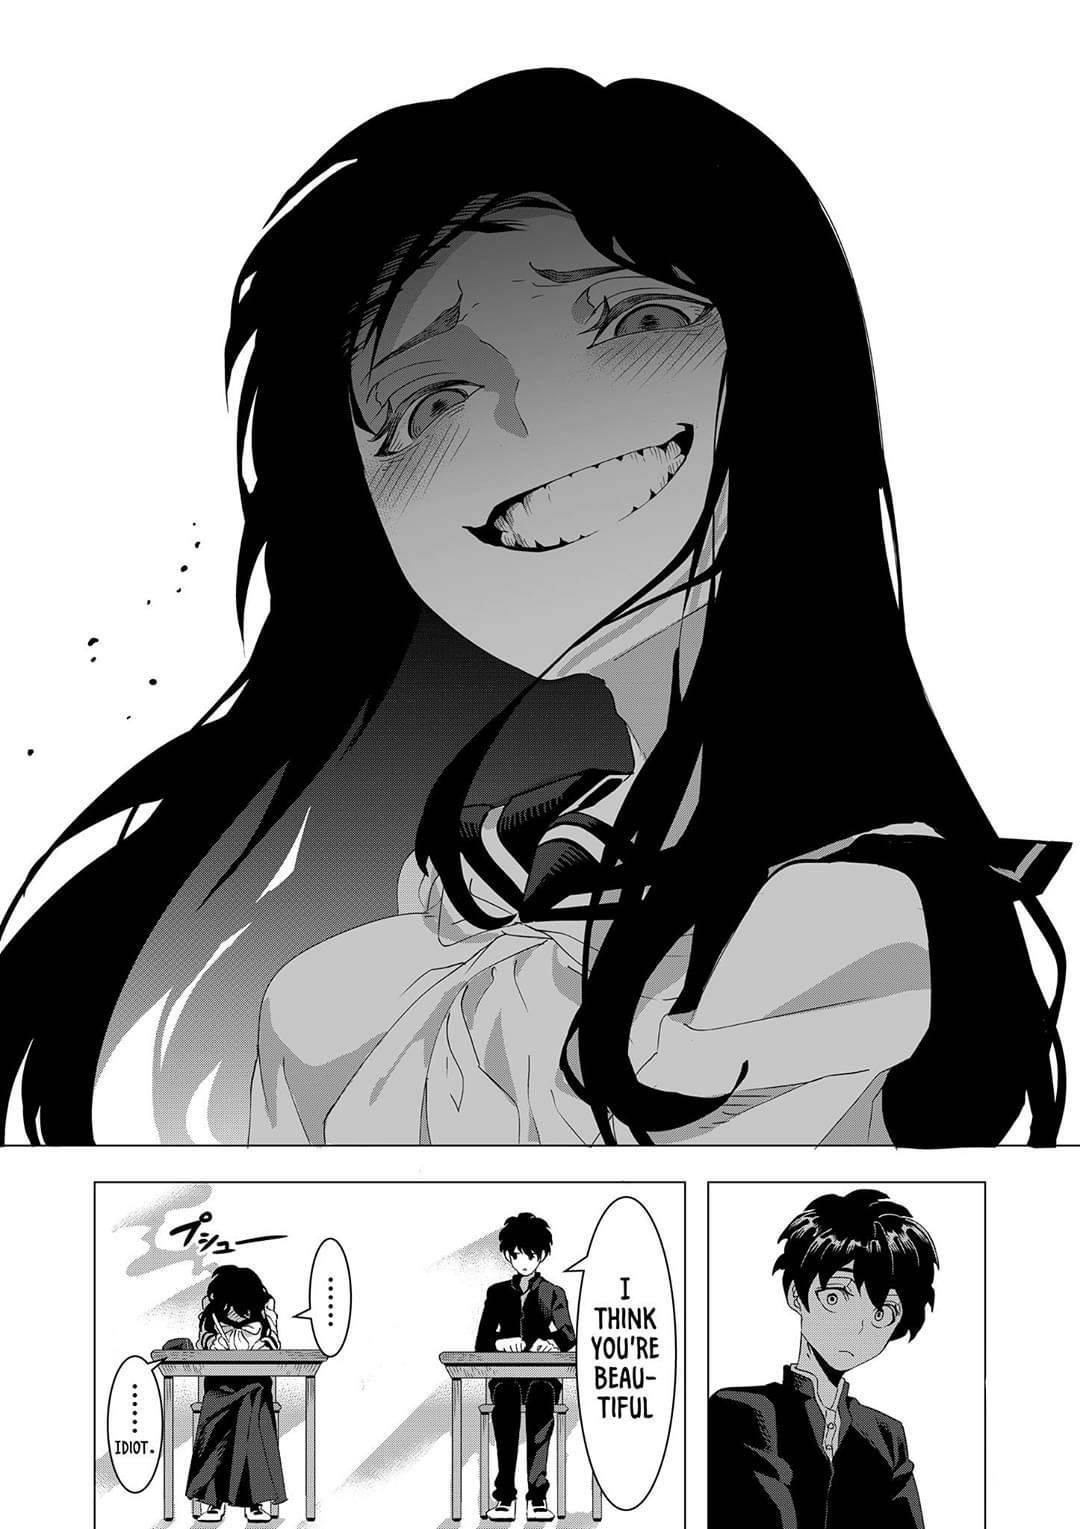 A story about a creepy girl smile